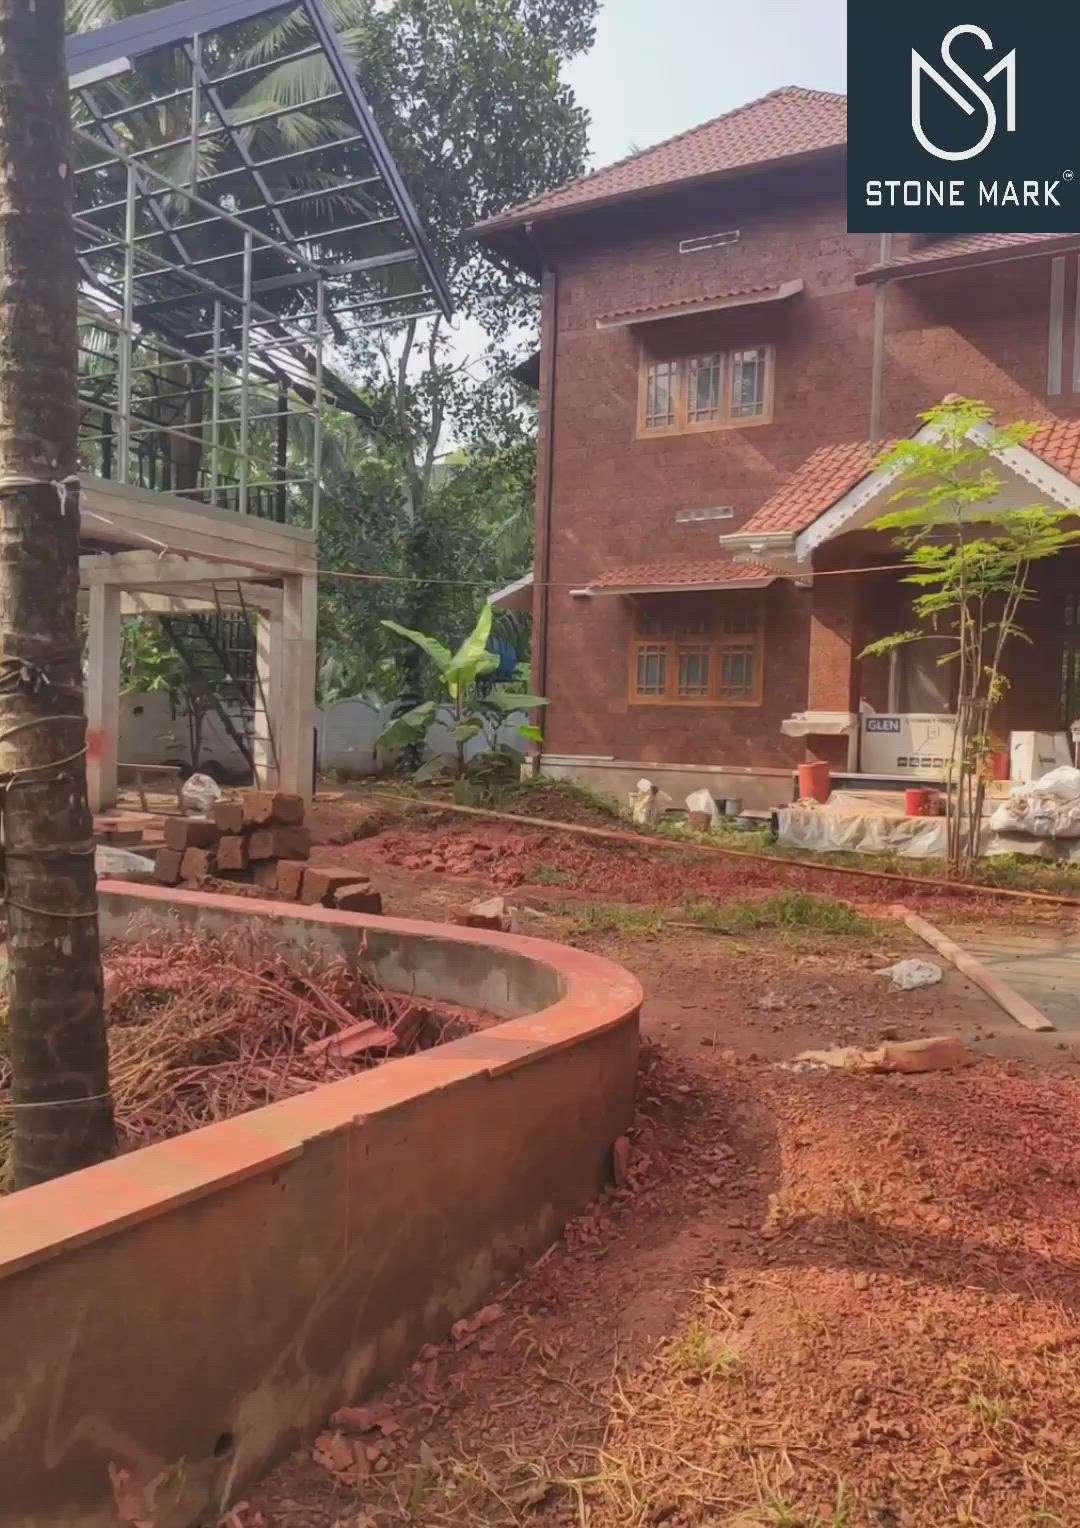 Landscaping with Natural Stone in Pebbles
Client: Mr. Alavi Kutty
Site: Randathanni
Area: 3000 sqft
Supply and service all over Kerala
Contact No: +919567441112




#Architect #architecturedesigns #Architectural&Interior #4BHKPlans #2BHKHouse #BedroomDecor #ContemporaryHouse #HouseDesigns #ElevationHome #ElevationDesign #CivilEngineer #Electrical #FlooringTiles #RoseGarden #GraniteFloors #VerticalGarden #LandscapeGarden #BuffaloGrass #HouseDesigns #MexicanGrass #PearlGrass #tandoorstone #Tandur #BangaloreStone #bangalore #5centPlot #cladding #stones #PrayerCorner #banglourstone #tandurstone #corian grass#